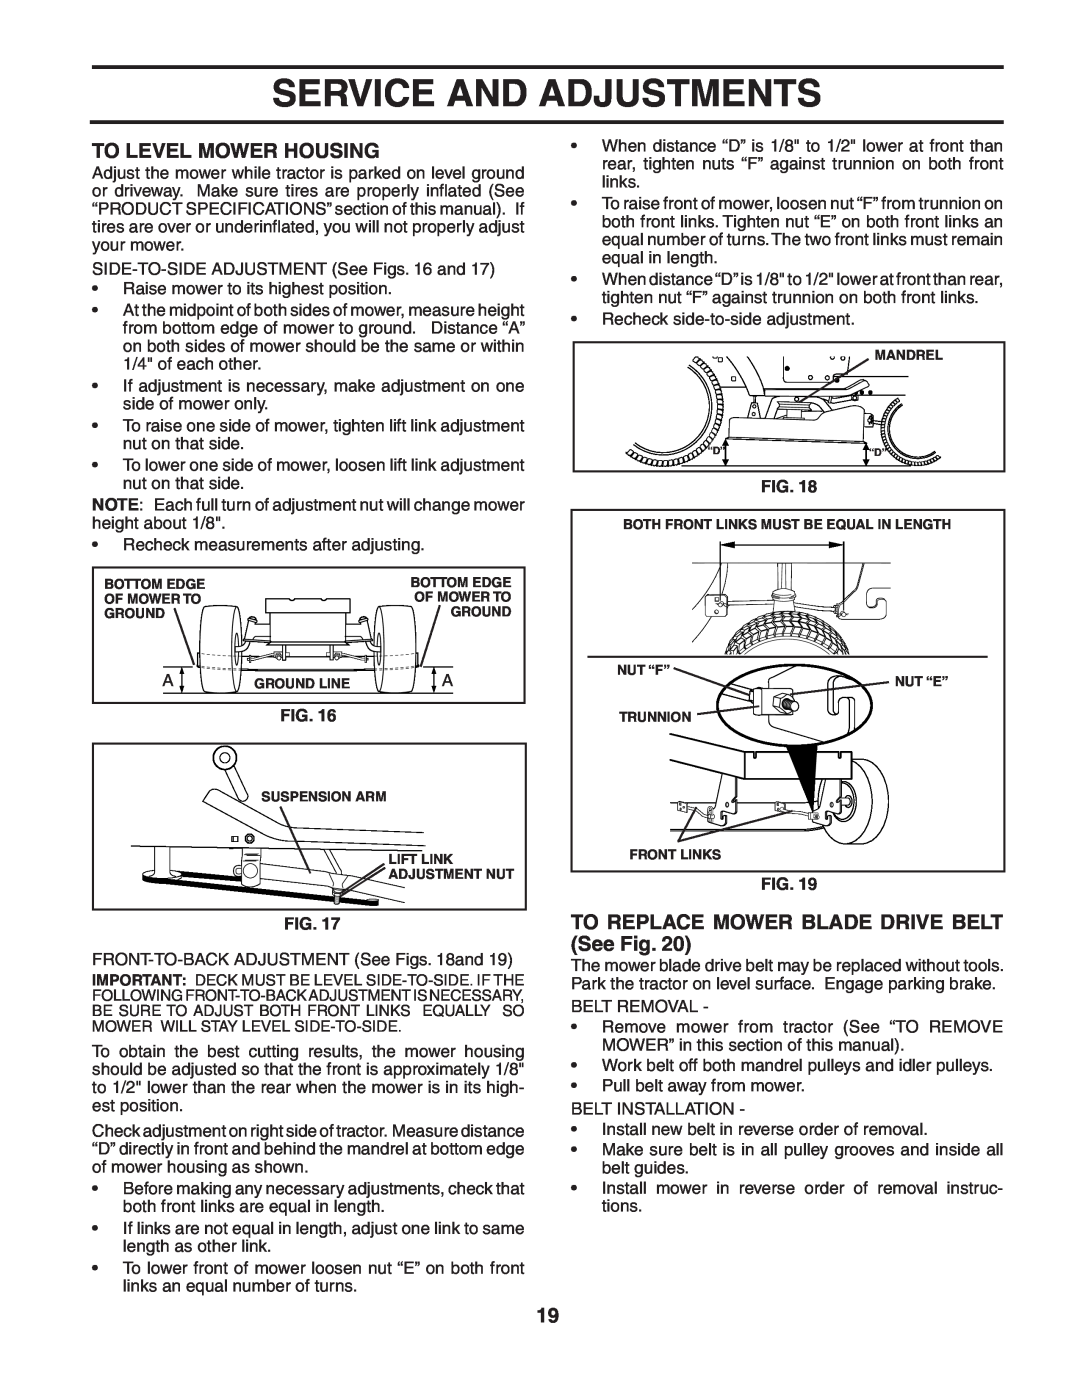 Poulan 188870 manual To Level Mower Housing, TO REPLACE MOWER BLADE DRIVE BELT See Fig, Service And Adjustments 